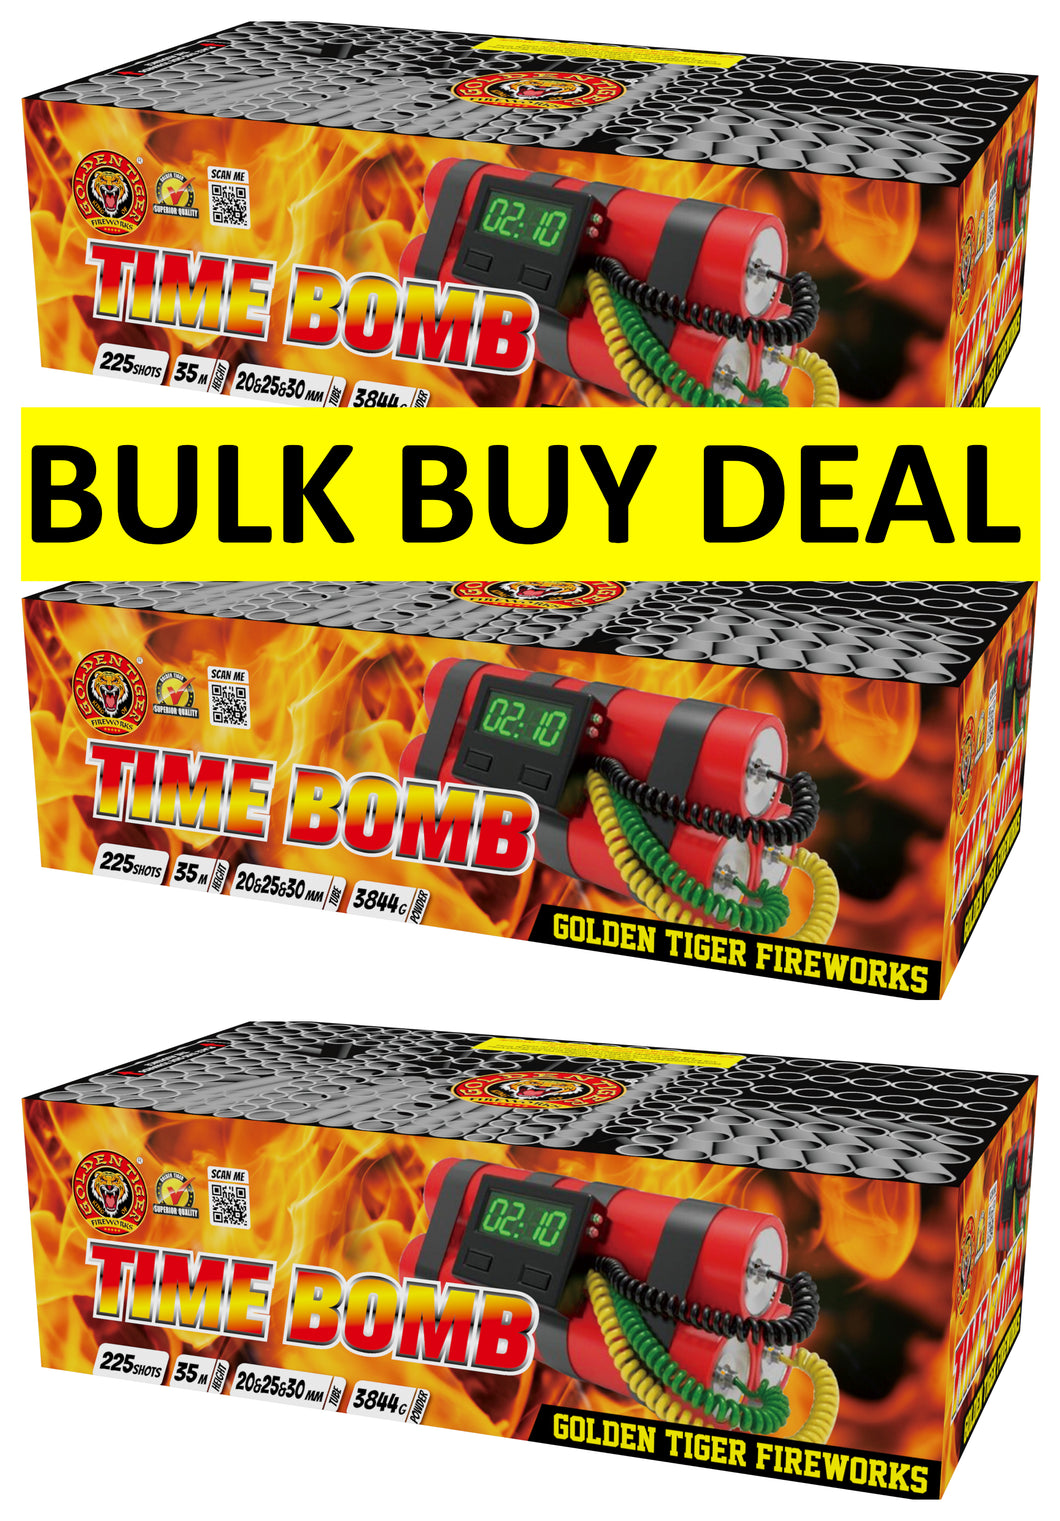 3 x TIME BOMB 225shots 1.3G COMPOUND CAKE BULK BUY (3 x £170 each including VAT) - IN STORE ONLY